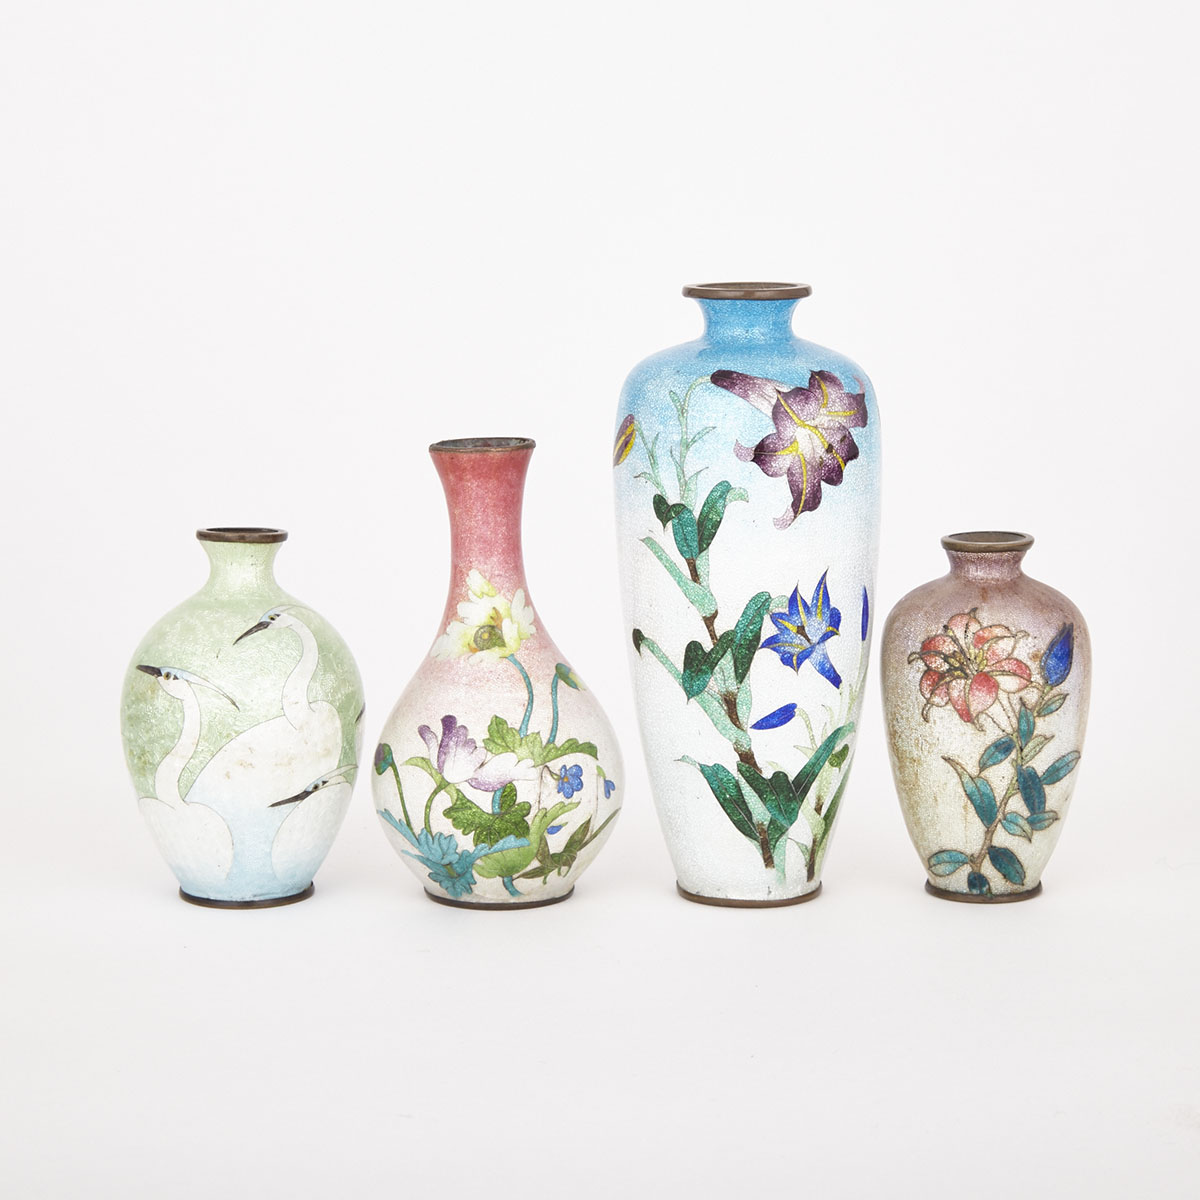 Group of Four Japanese Cloisonne Vases, Ito Mark, early 20th Century